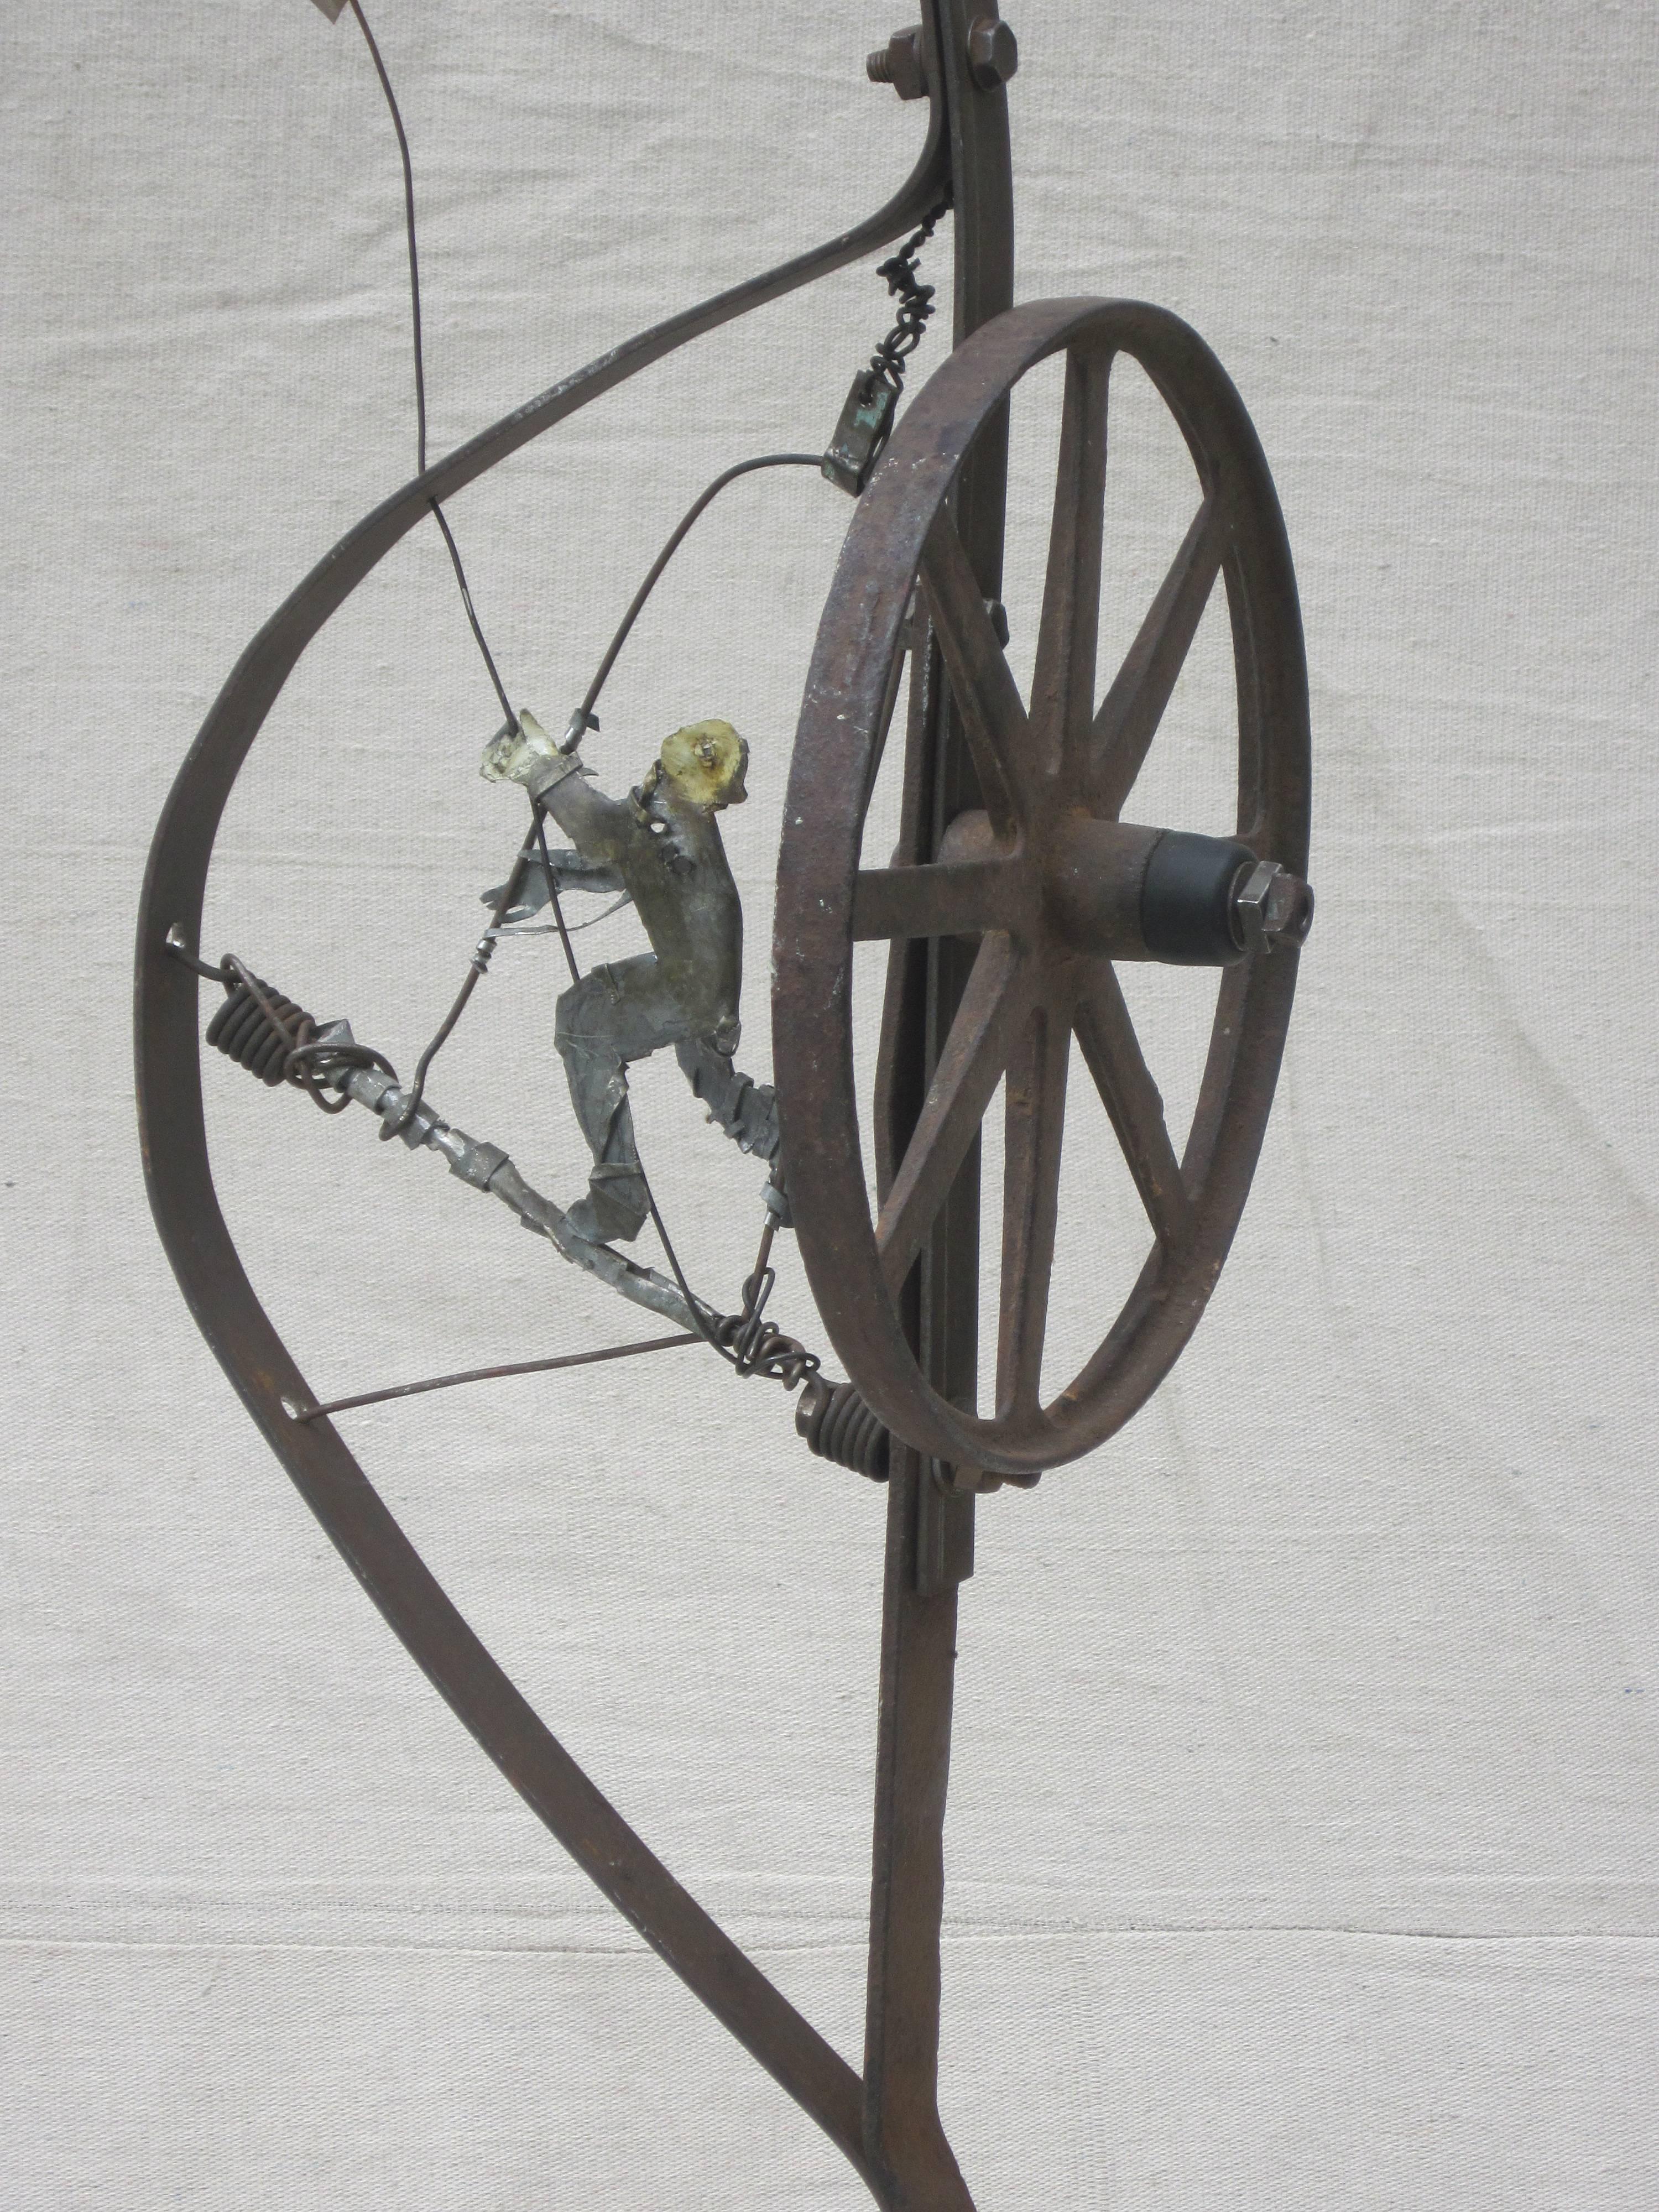 Terry Turrell is known for his paintings and sculpture made often using found materials incorporating figures and animals. In this piece the wheel is a repeated element relating to the figures as well as carrying the figures in the cart. Swing time